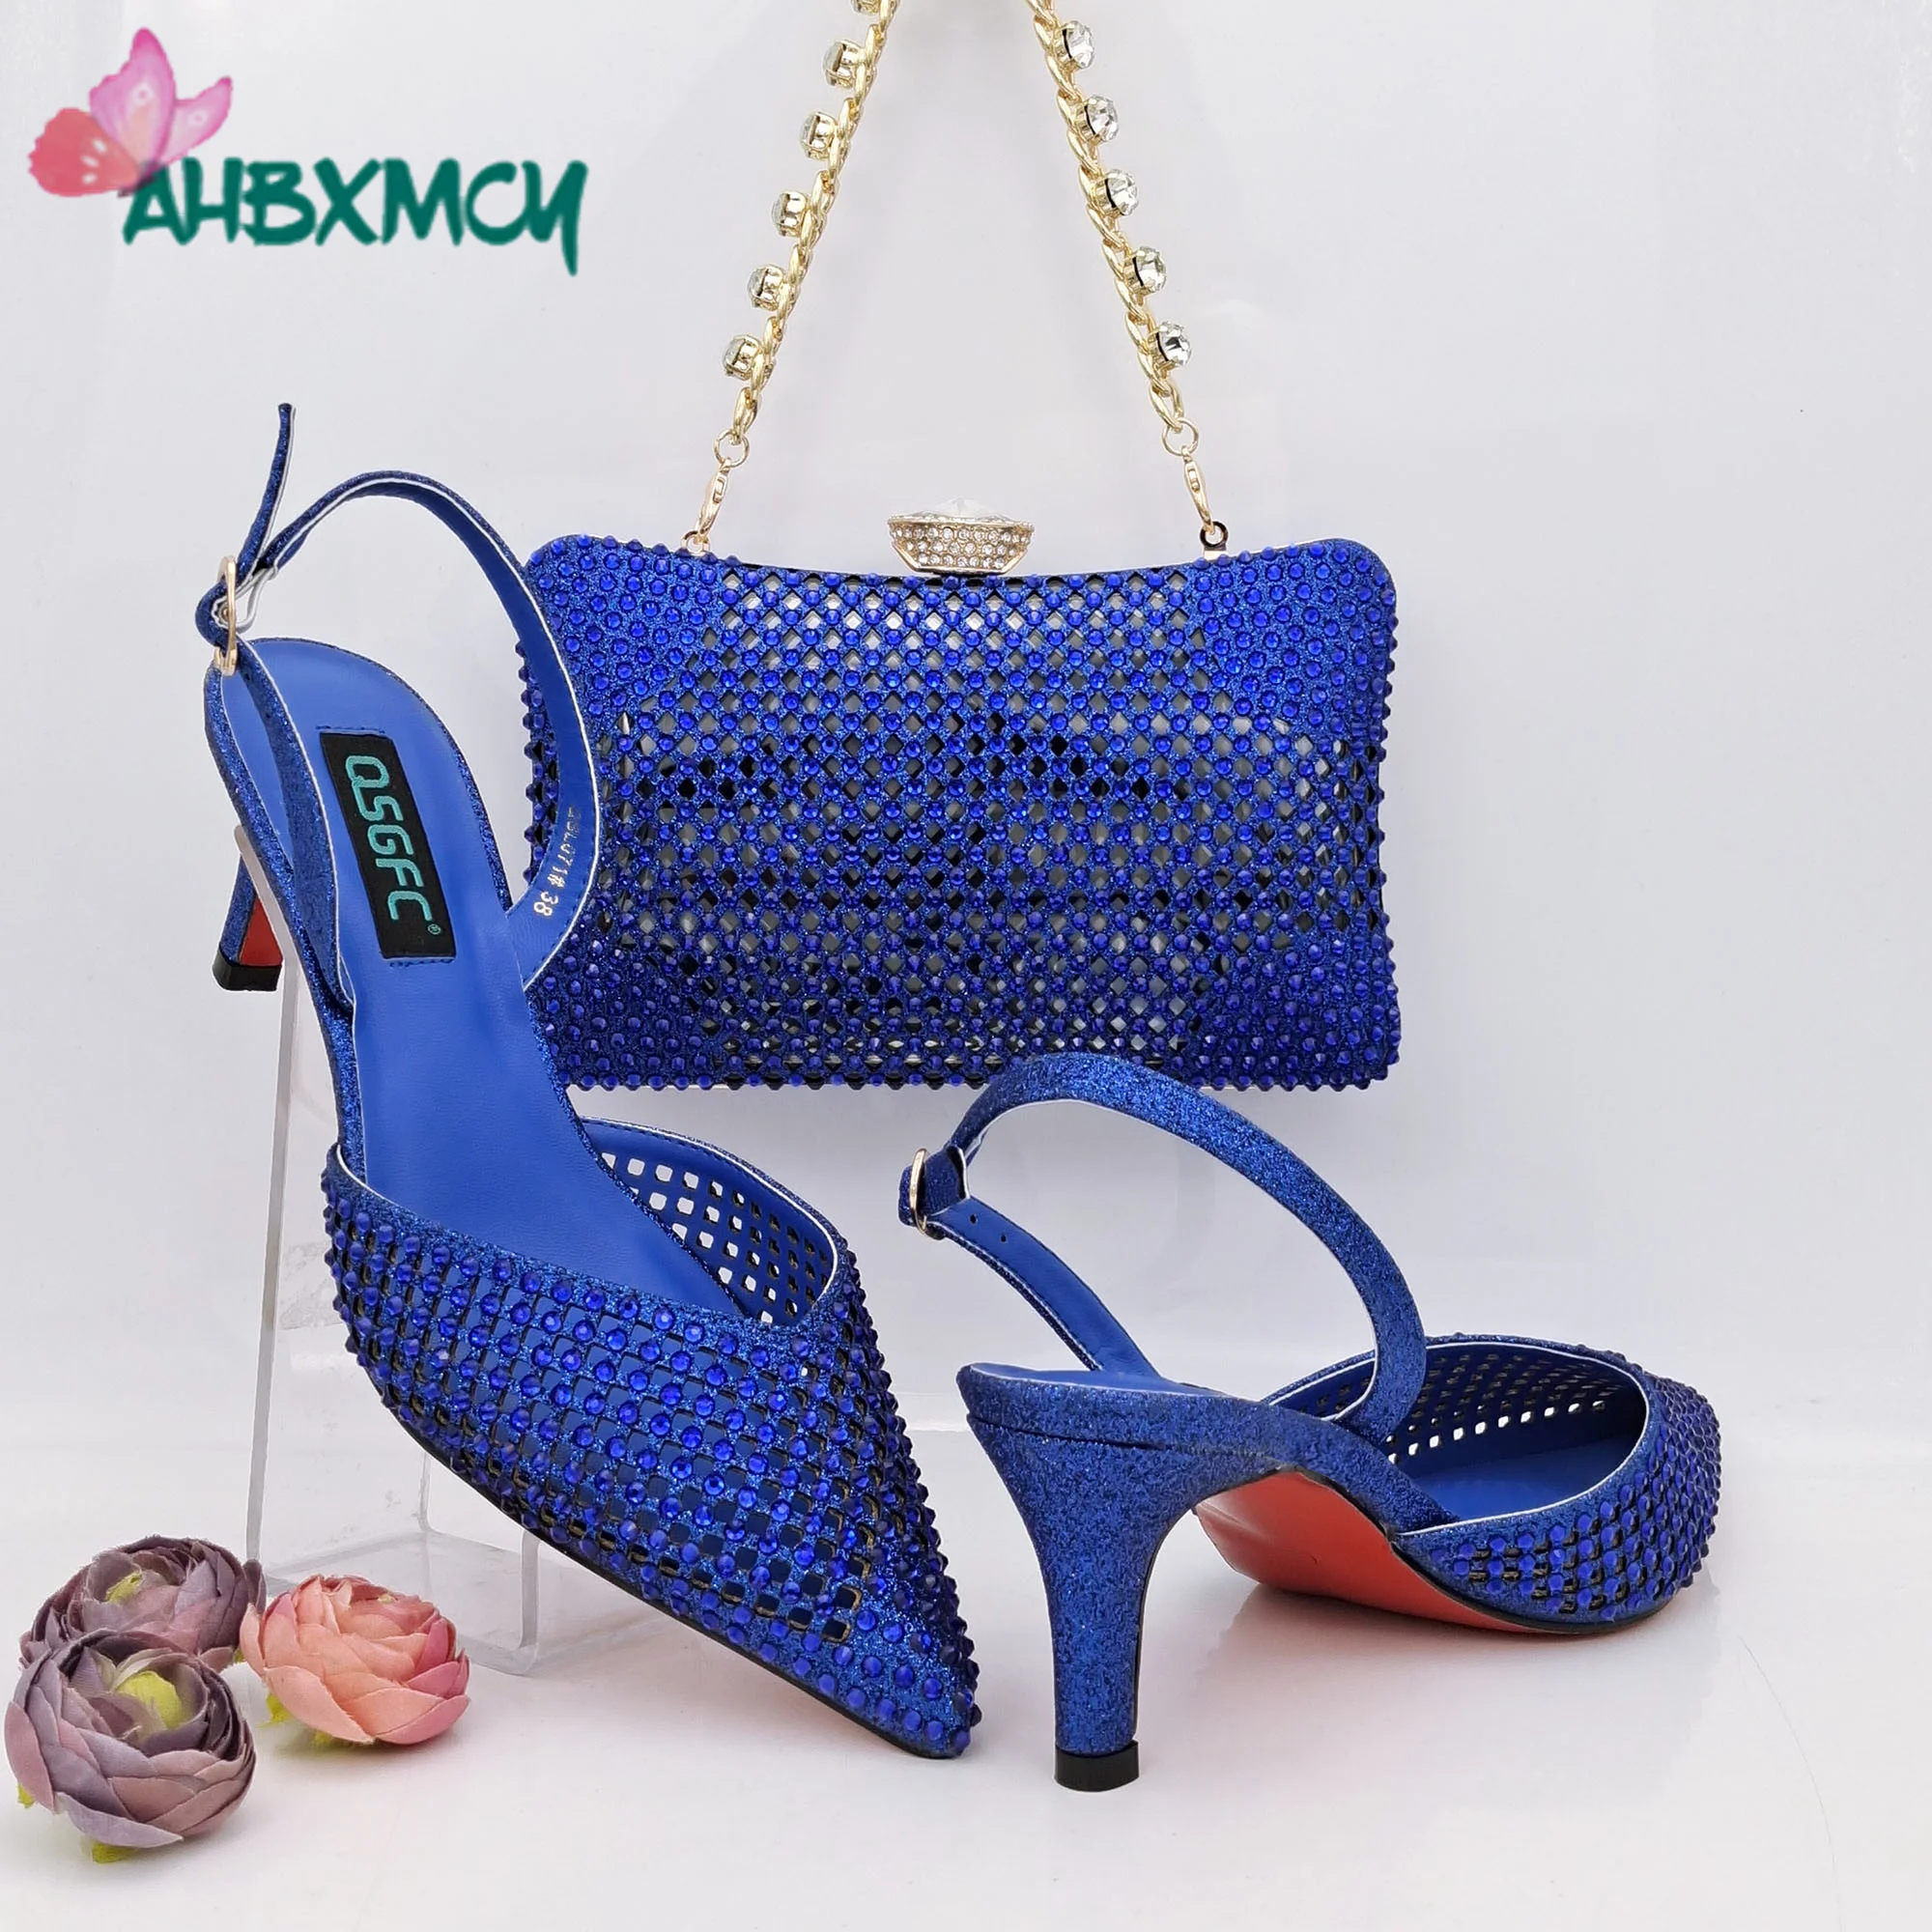 

SweetStyle New Arrivals Italian Women Shoes Matching Bag Set with Shinning Crystal with Thin Heels for Garden Party in Royal Blu